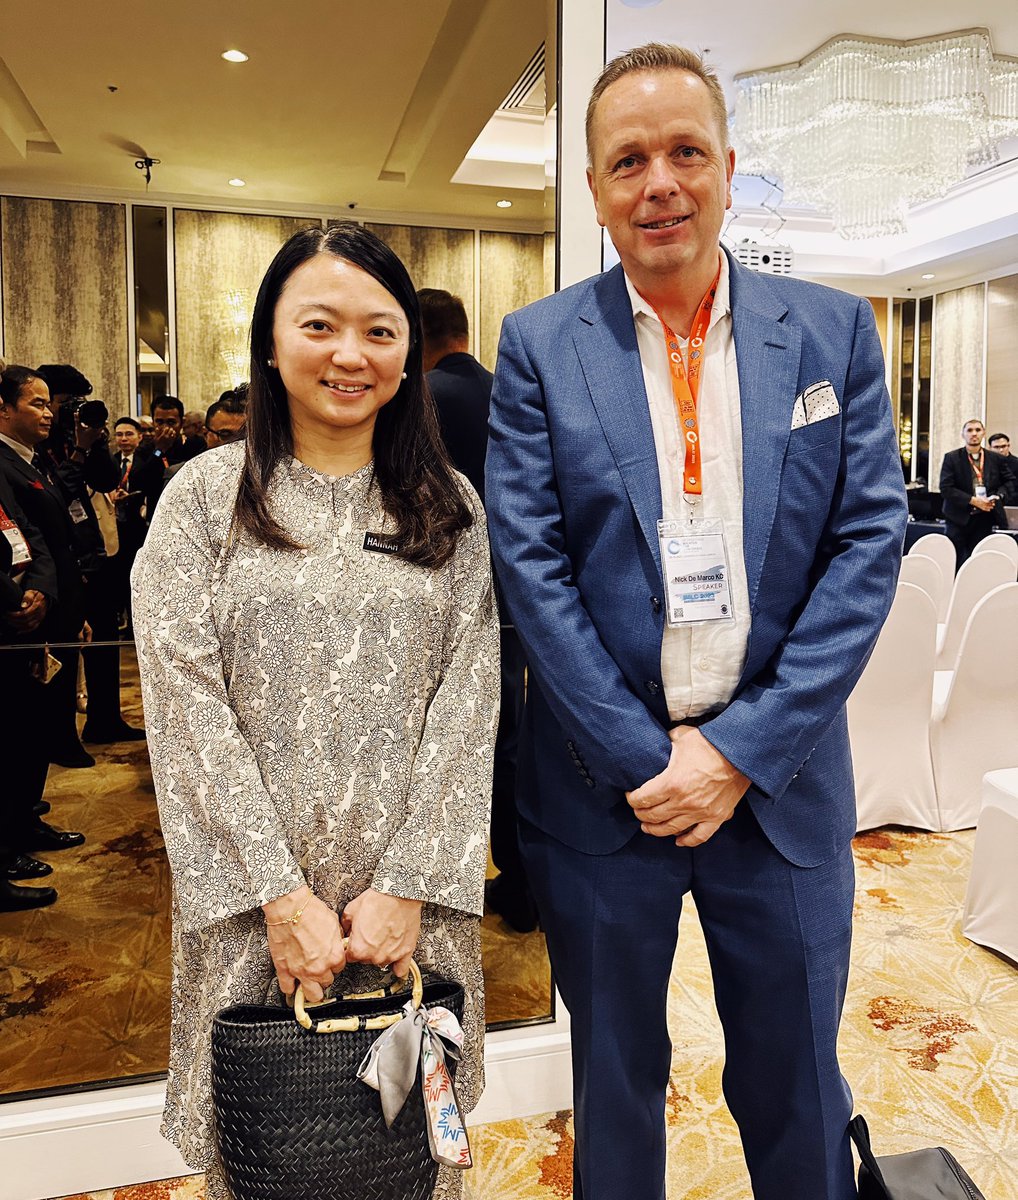 With the Malaysian Minister of Sport & Youth, KB Puan Hannah Yeoh, at the Malaysian International Law Conference yesterday. The new Minister gave an impressive talk about her plans to grow sport, also for social well being, at a very well attended session chaired by my good…